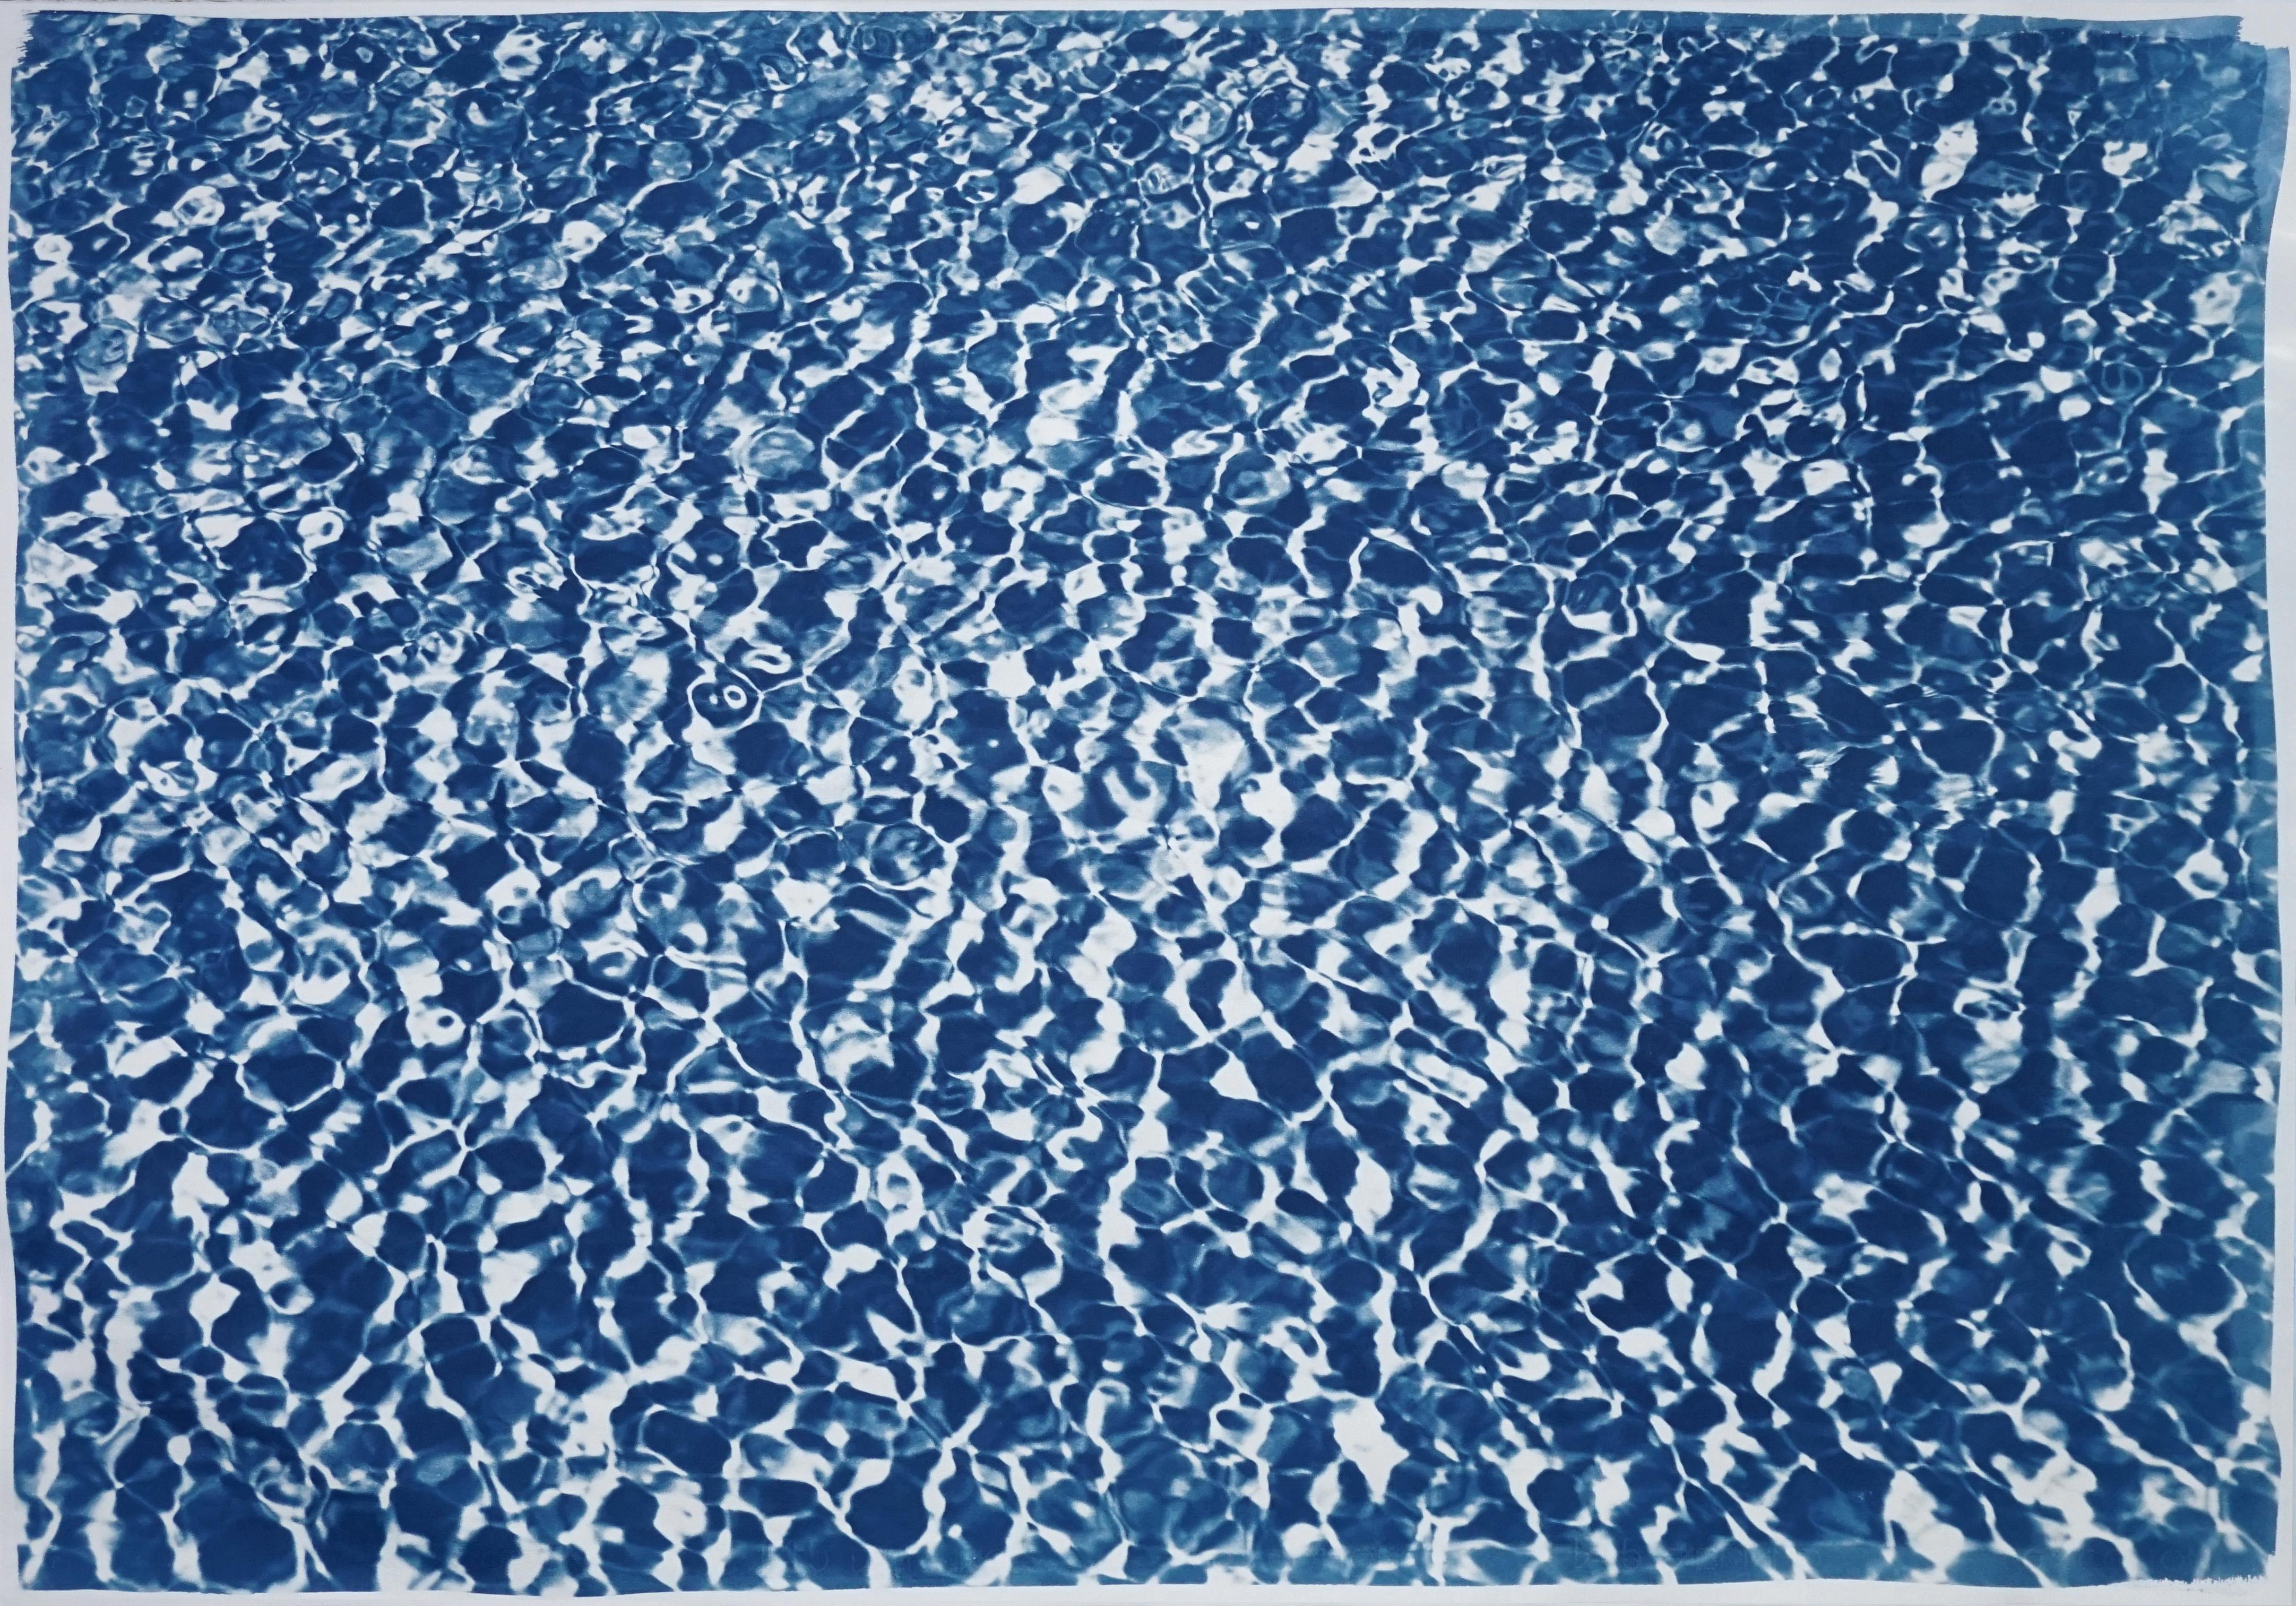 Kind of Cyan Abstract Print - Infinity Pool Water Reflections, Blue & White Pattern, Handmade Cyanotype Print